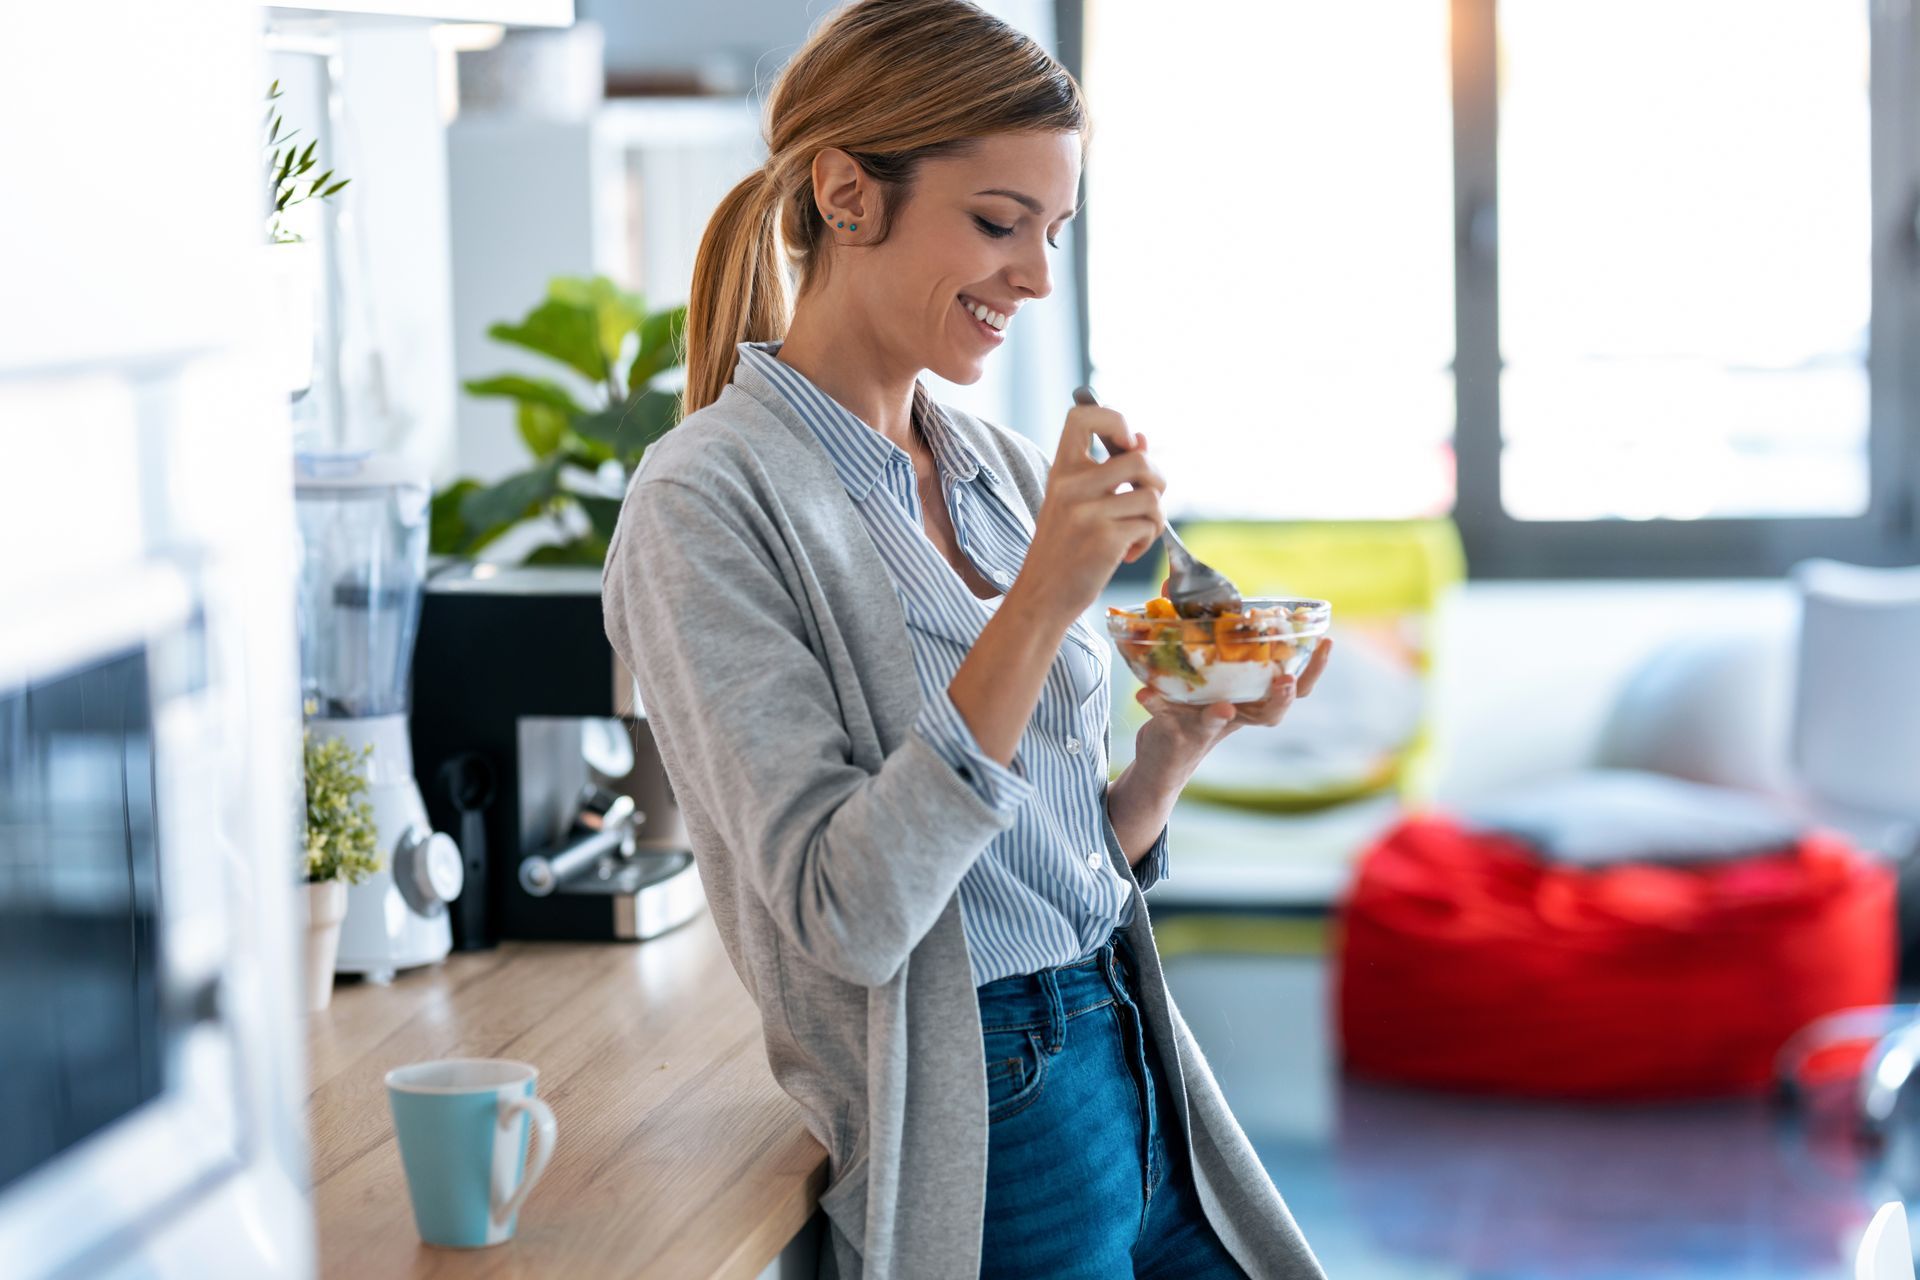 a woman is eating a salad from a bowl in a kitchen .